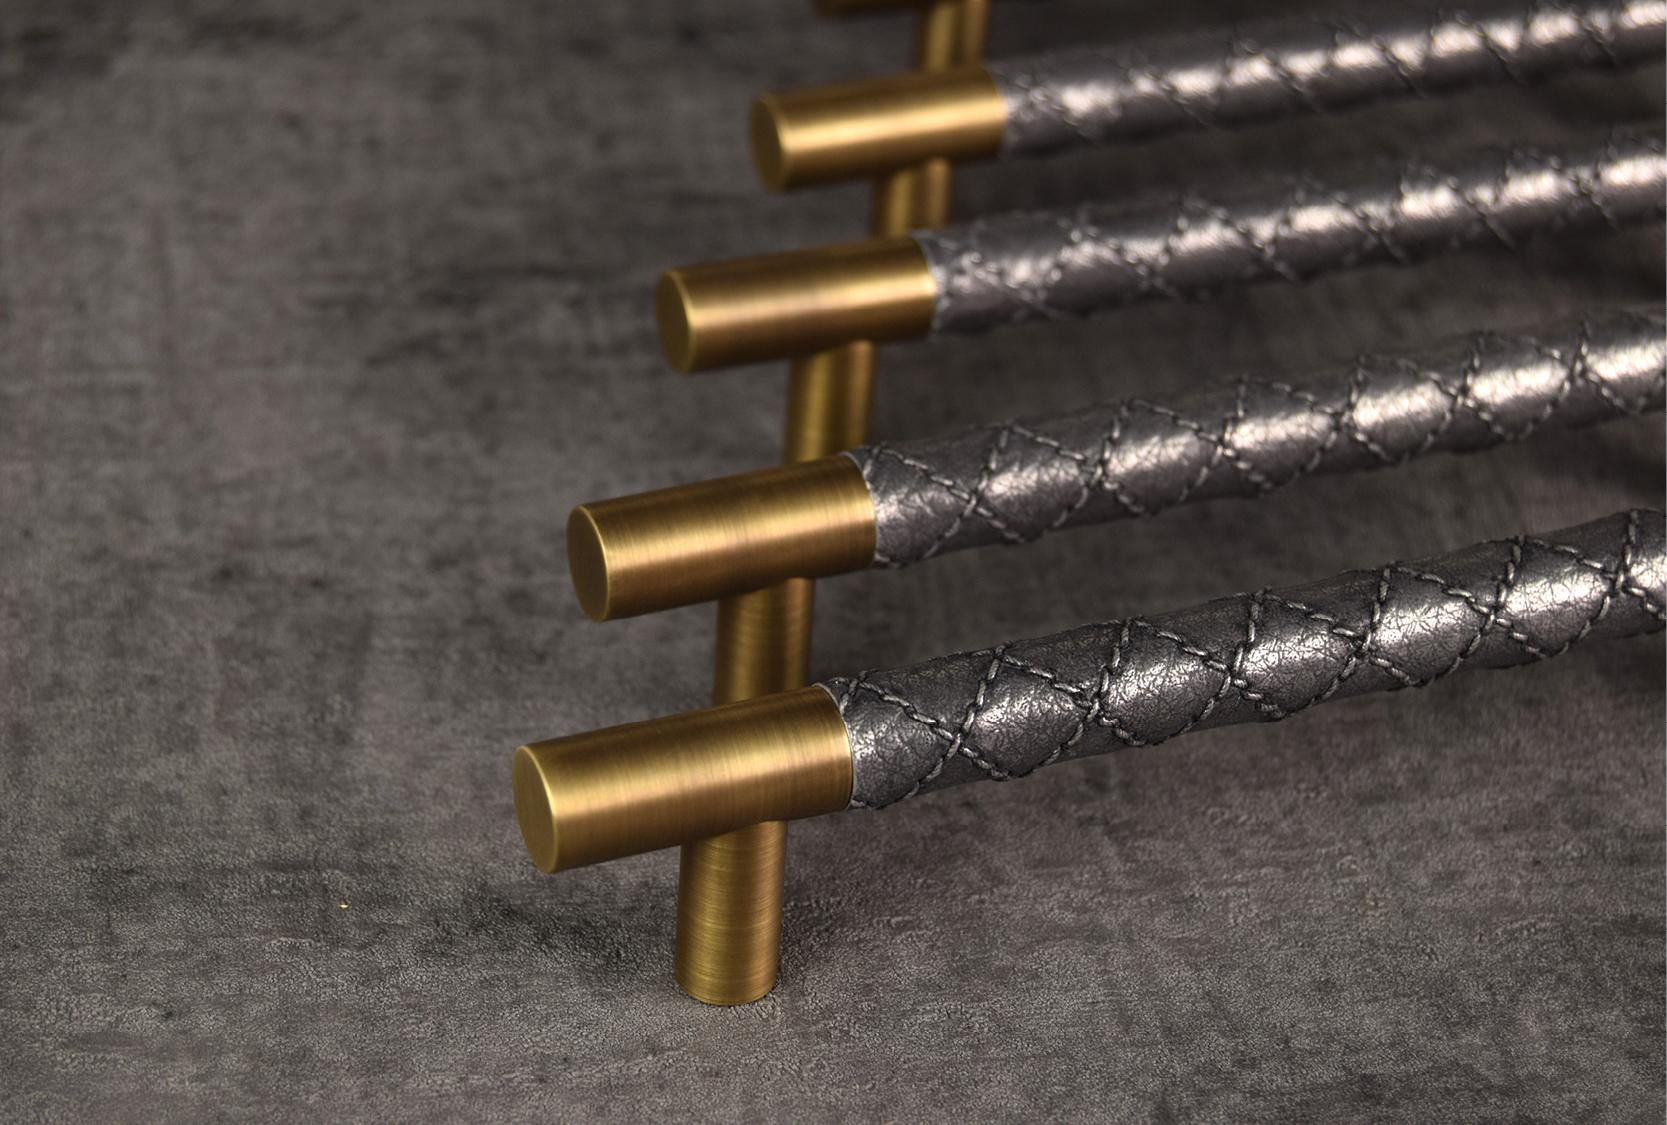 Image displays four custom chesterfield design pull handles. The pull handle grip is finished in Alupewt with a polished brass metal finish.